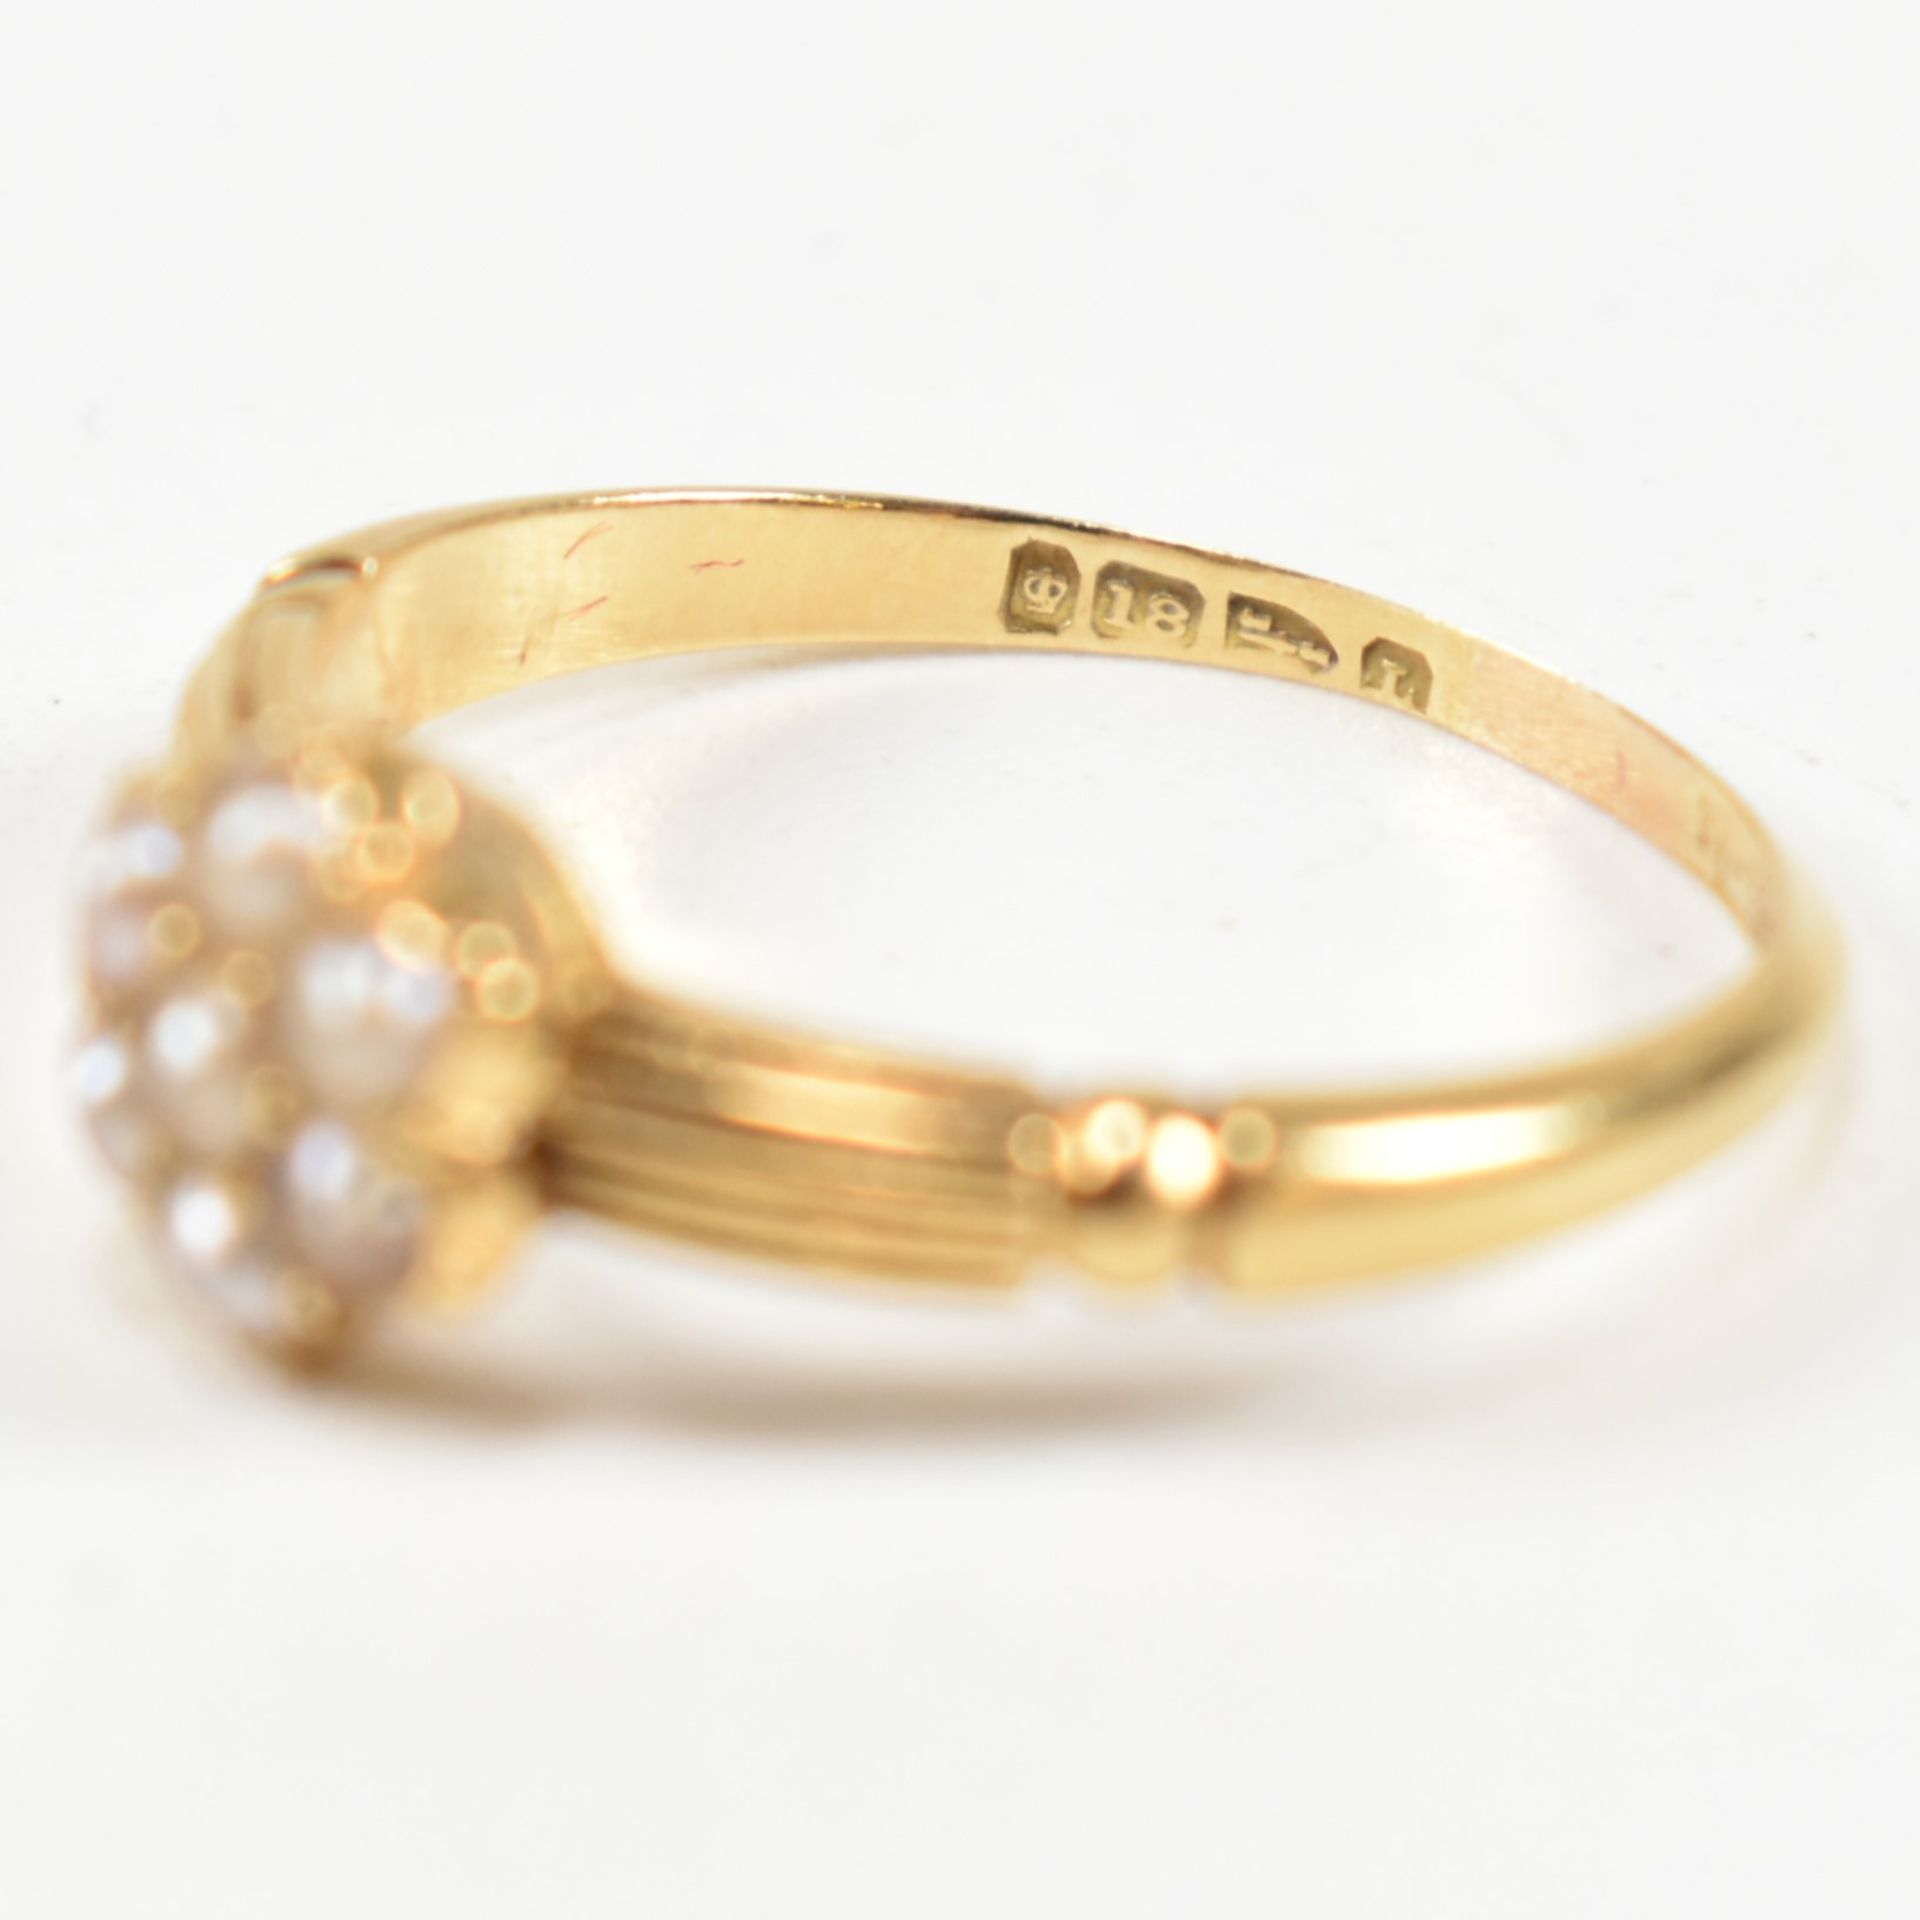 VICTORIAN HALLMARKED 18CT GOLD & SEED PEARL CLUSTER RING - Image 8 of 9